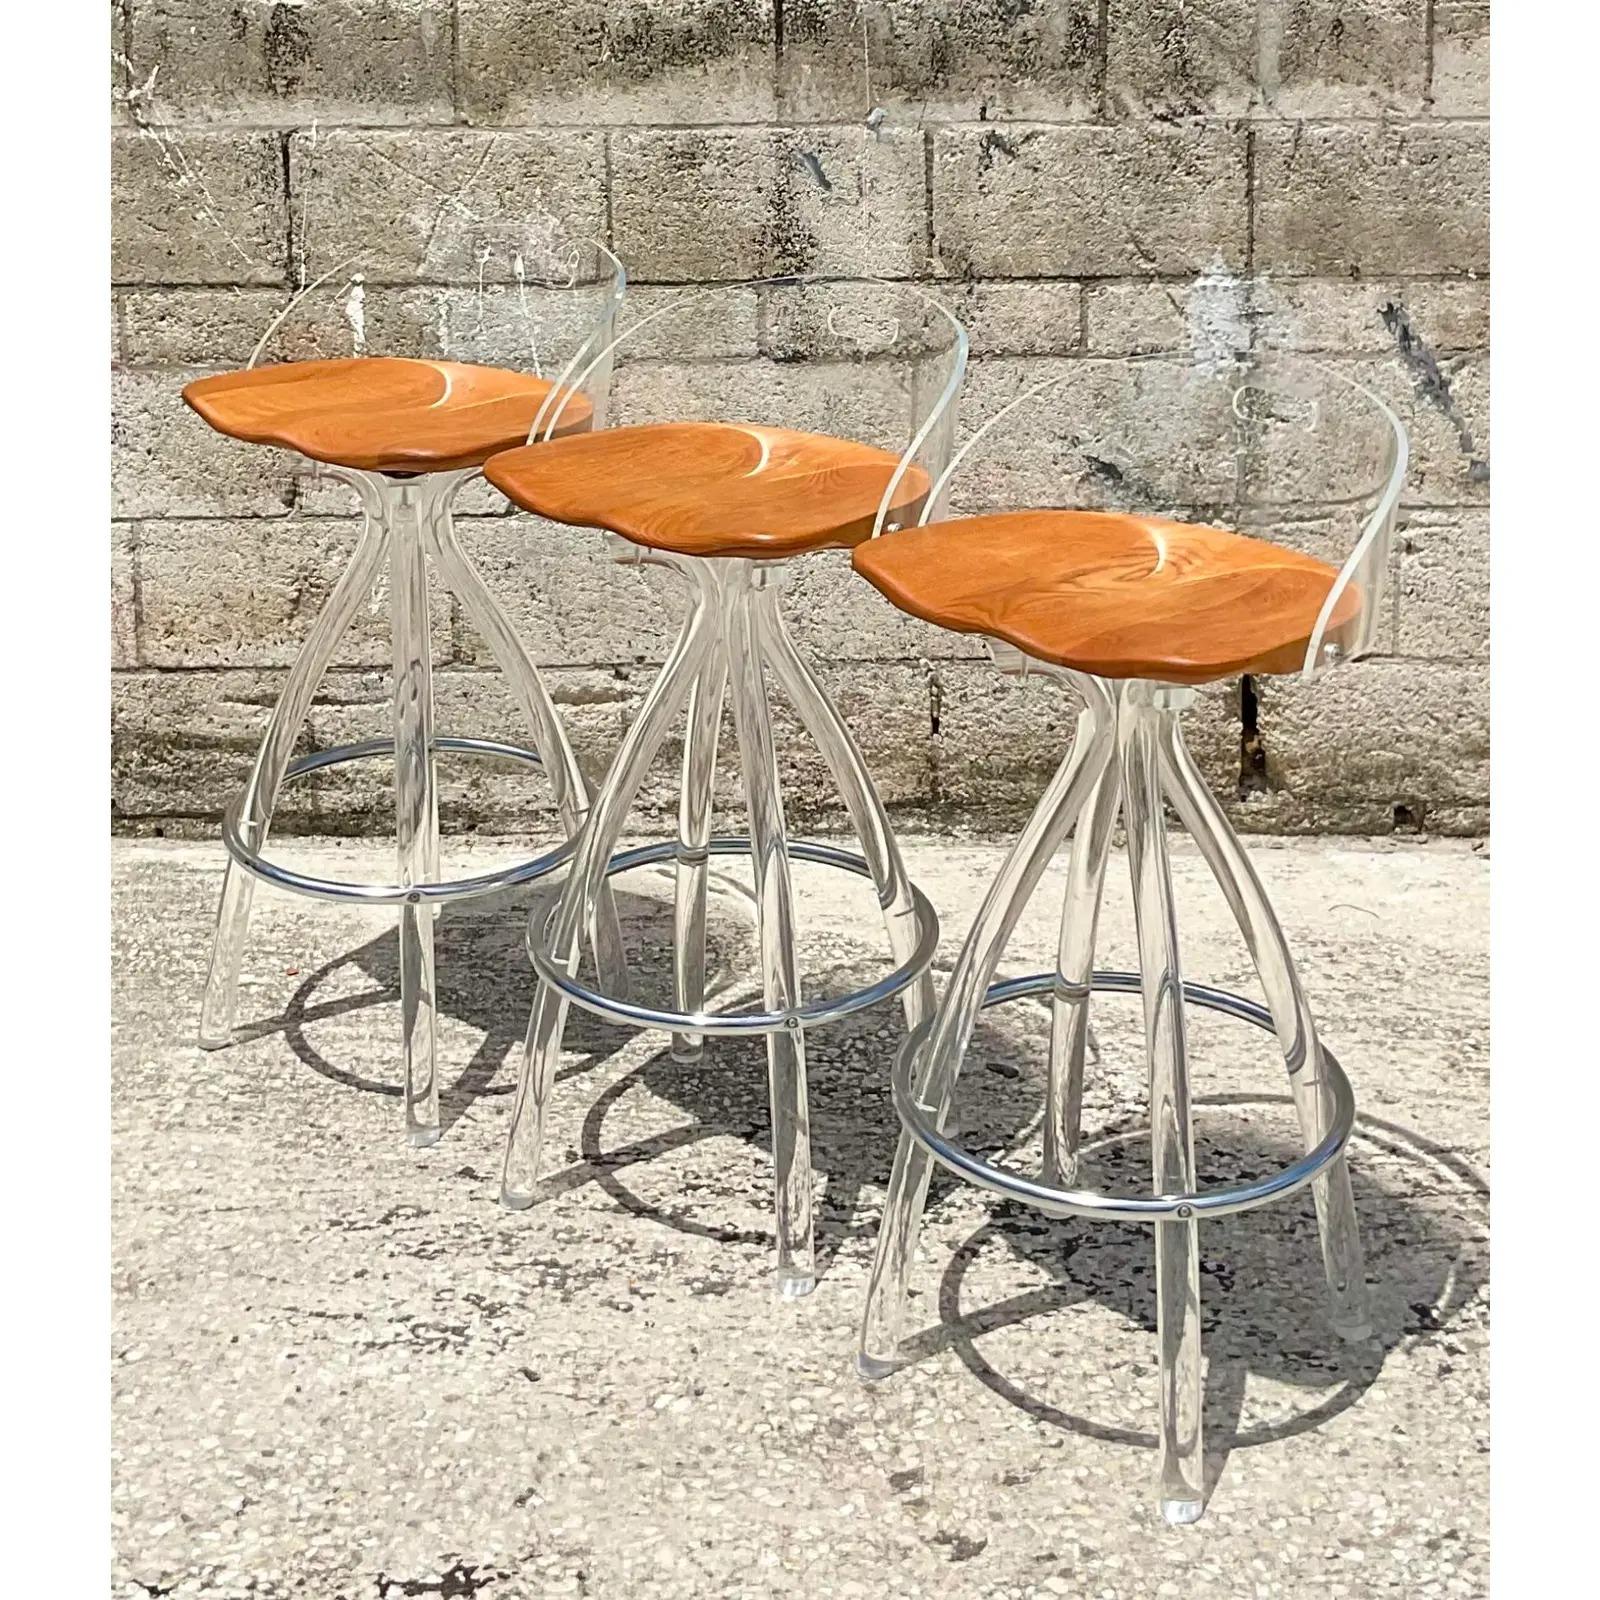 Fantastic vintage Contemporary set of three barstools. Made by the iconic Hill Company. Chic lucite frame with wood saddle swivel seats. Acquired from a Palm Beach estate.